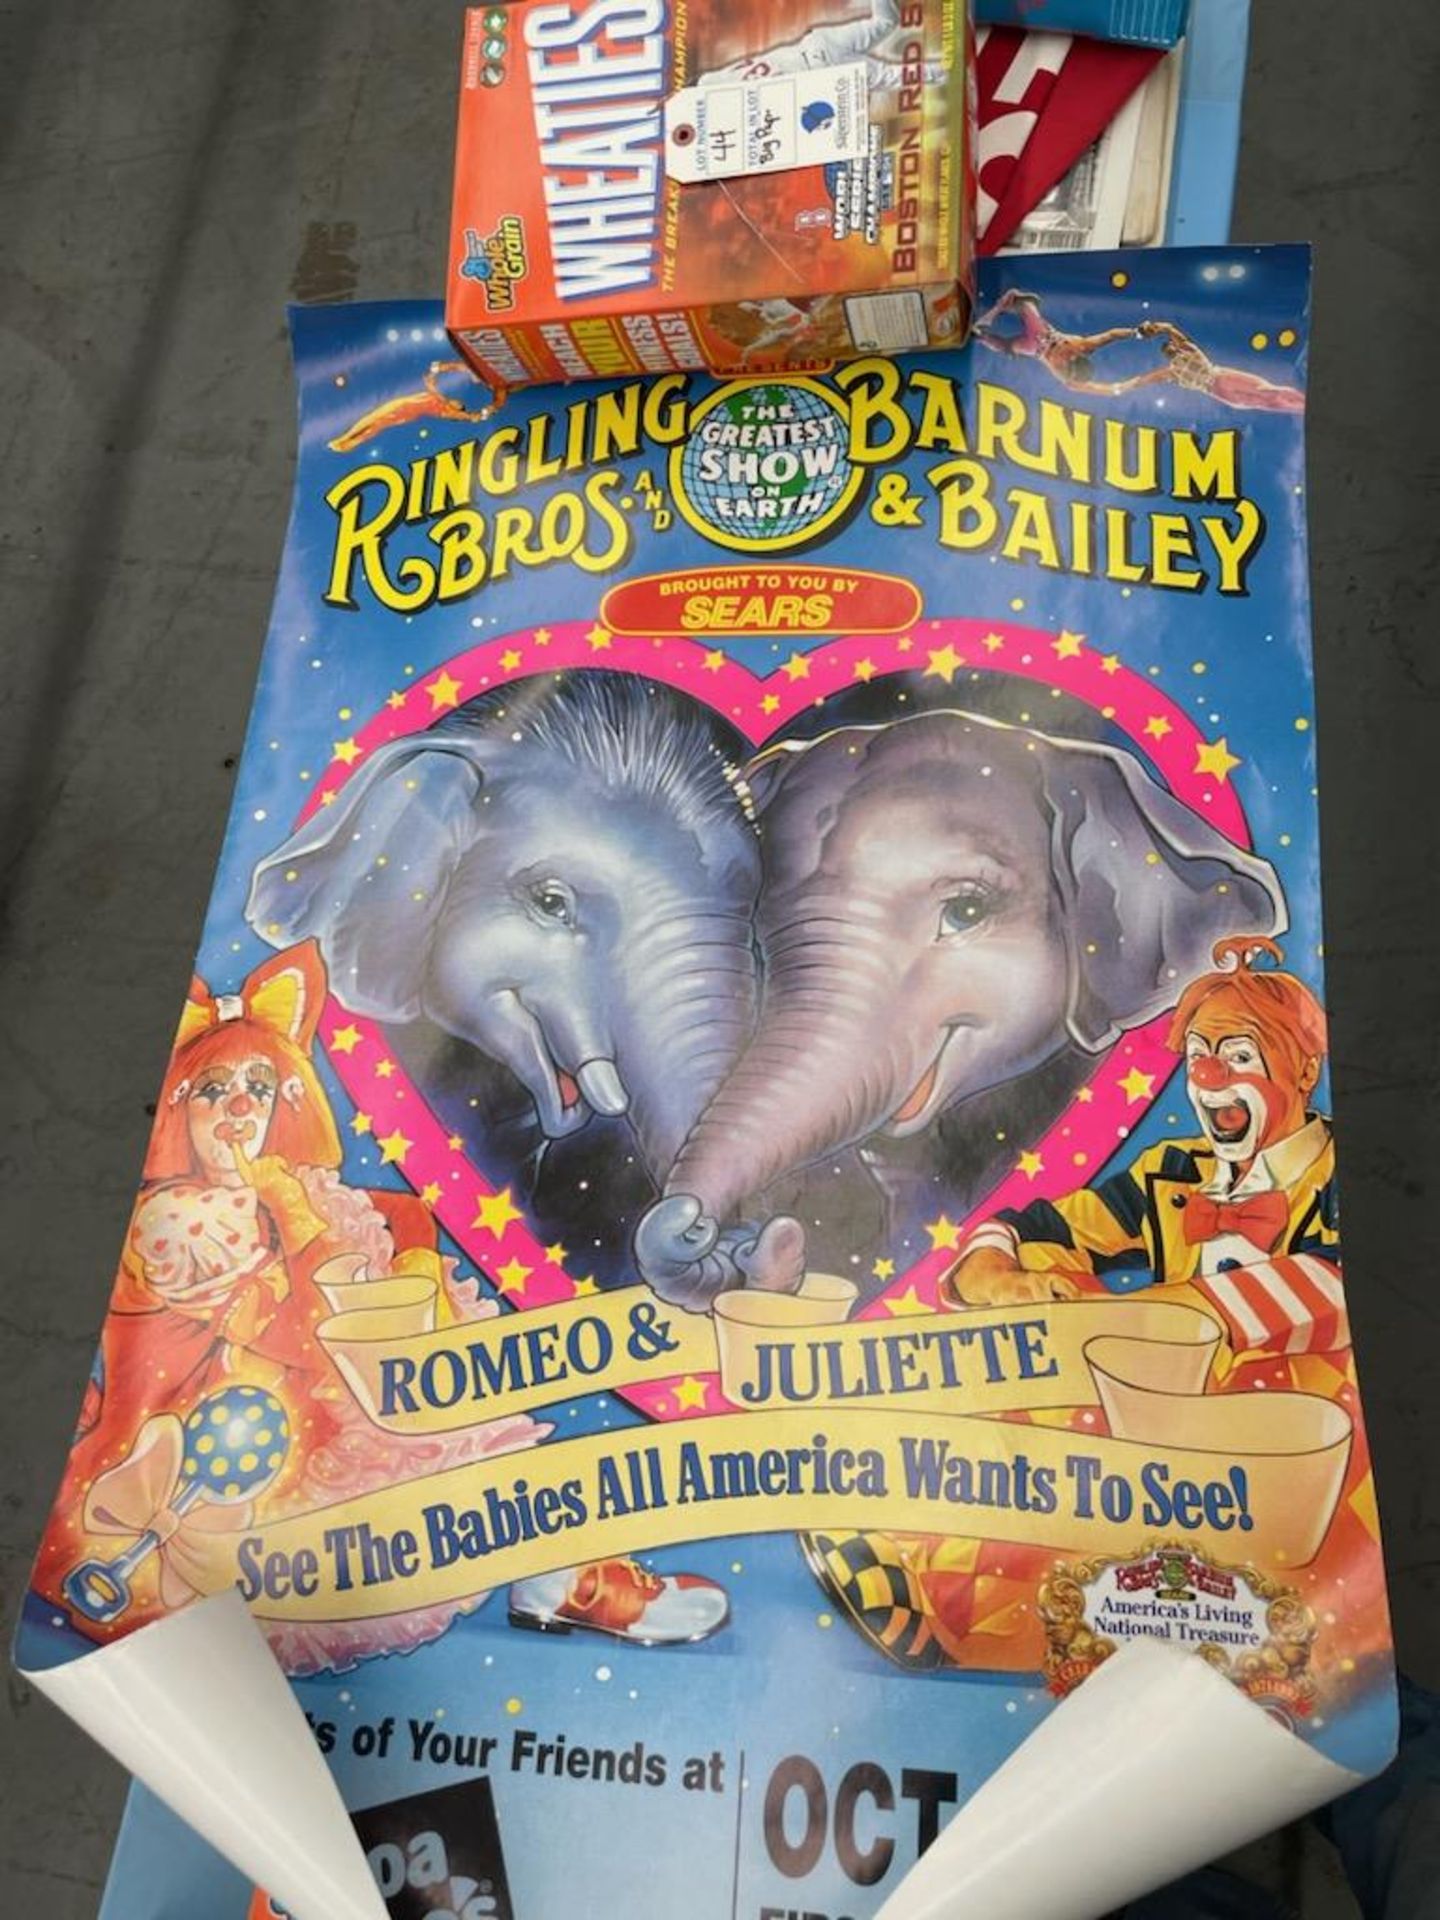 (Lot) Ringling Brothers Barnum & Bailey c/o: First Show Oct 11 2004 Feet Center Ticket, Matching - Image 2 of 4